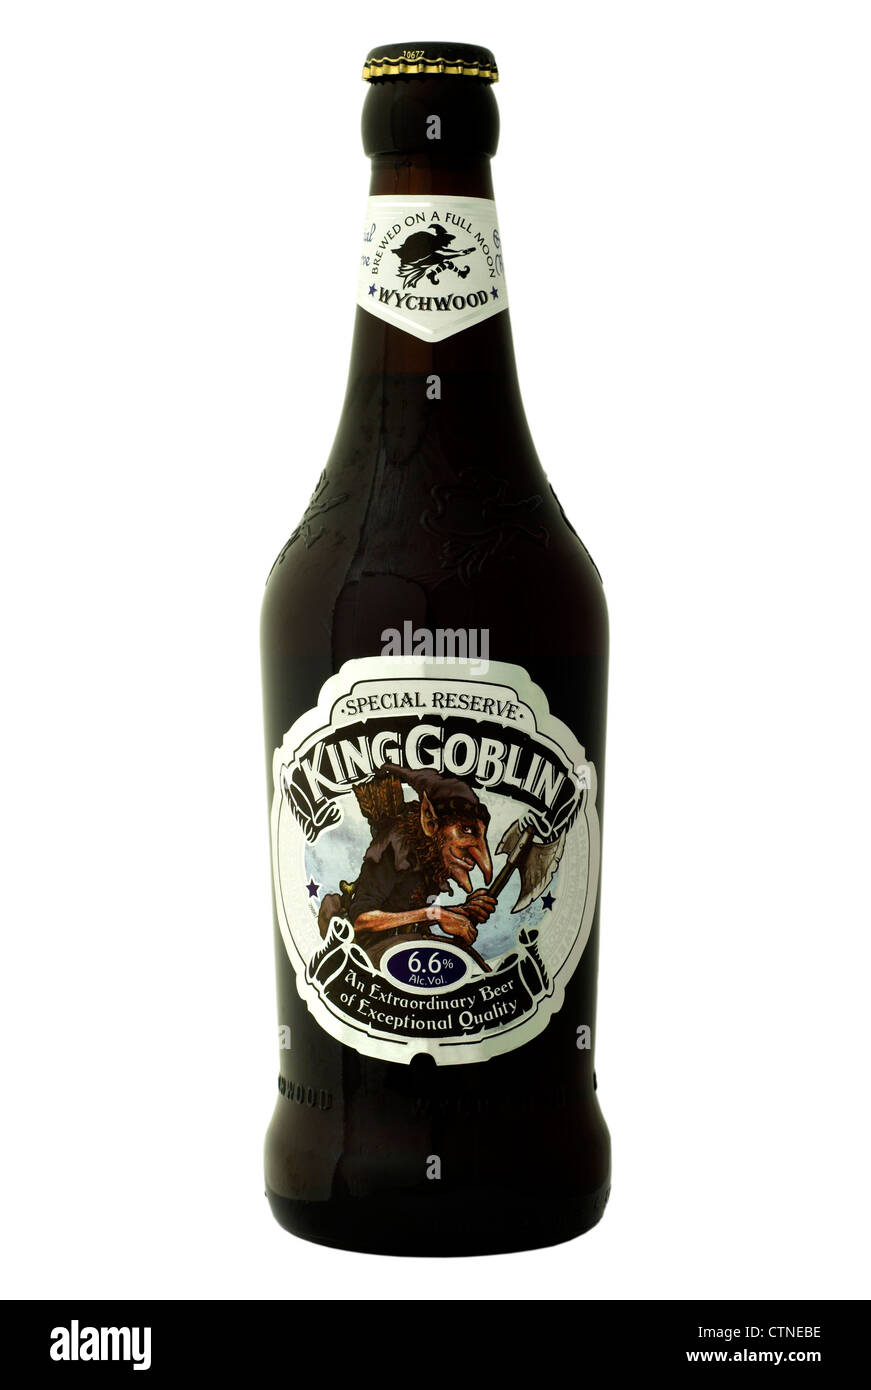 Wychwood (Marston's) King Goblin Special Reserve bottled beer - current @ 2012. Stock Photo